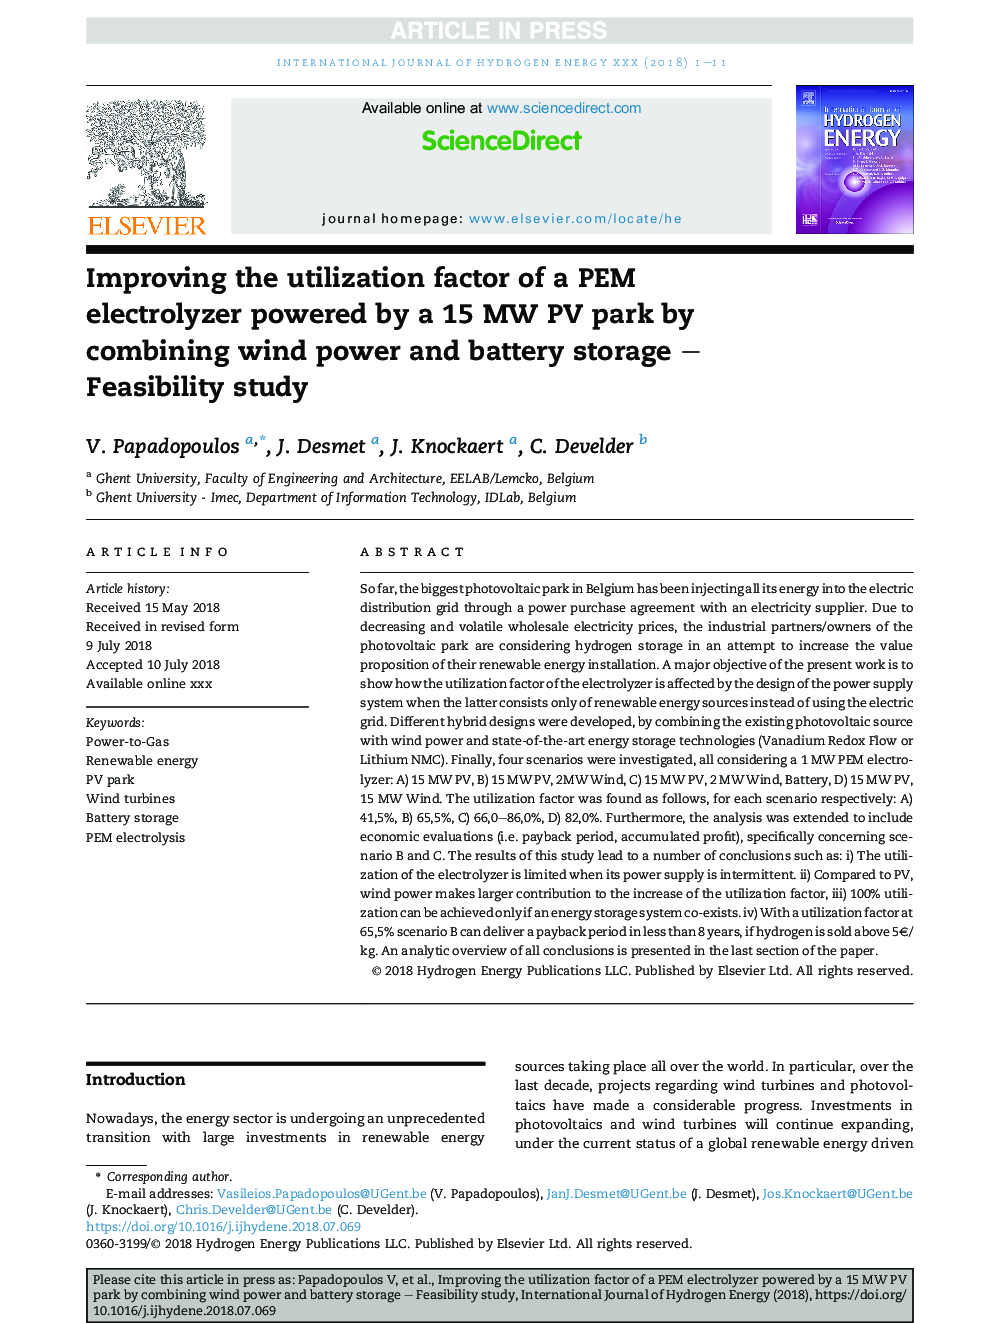 Improving the utilization factor of a PEM electrolyzer powered by a 15Â MW PV park by combining wind power and battery storage - Feasibility study